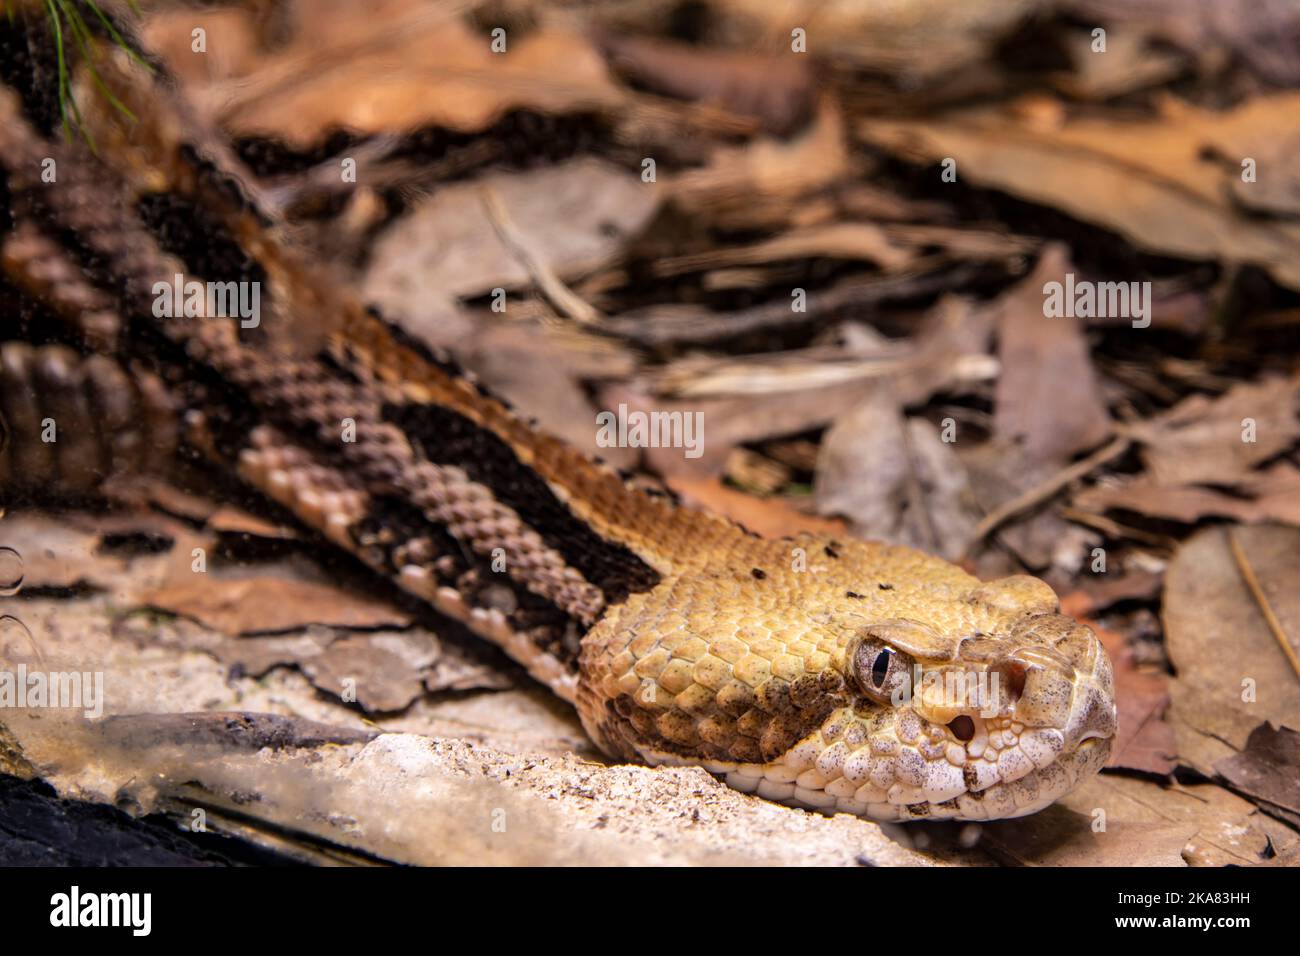 The timber rattlesnake (Crotalus horridus)  is a species of pit viper endemic to eastern North America. it is venomous, and this species is sometimes Stock Photo